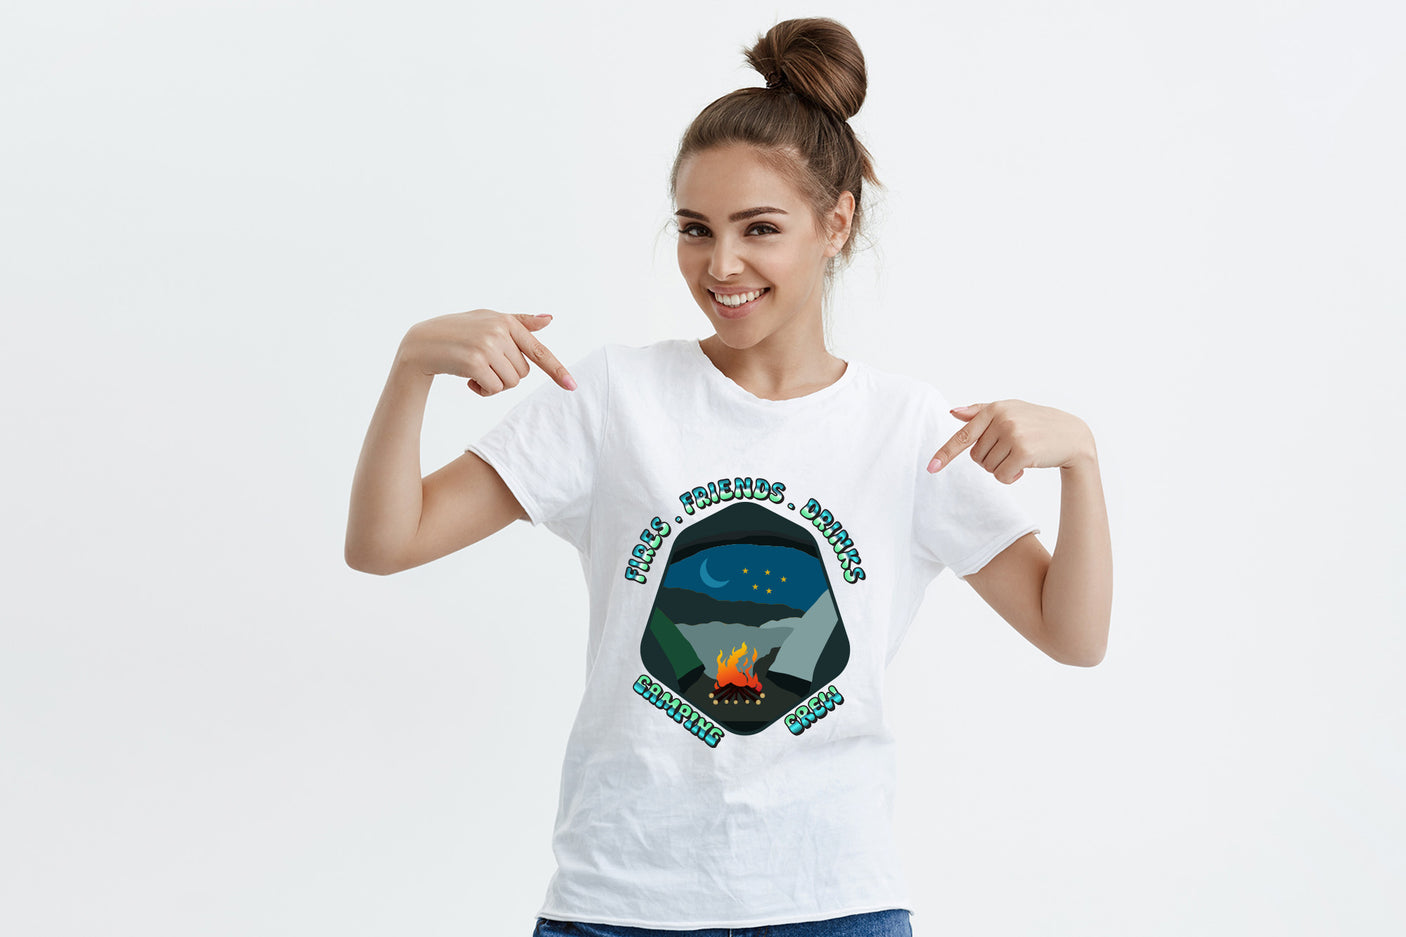 Retro Camping Sublimation - Camping Crew PNG